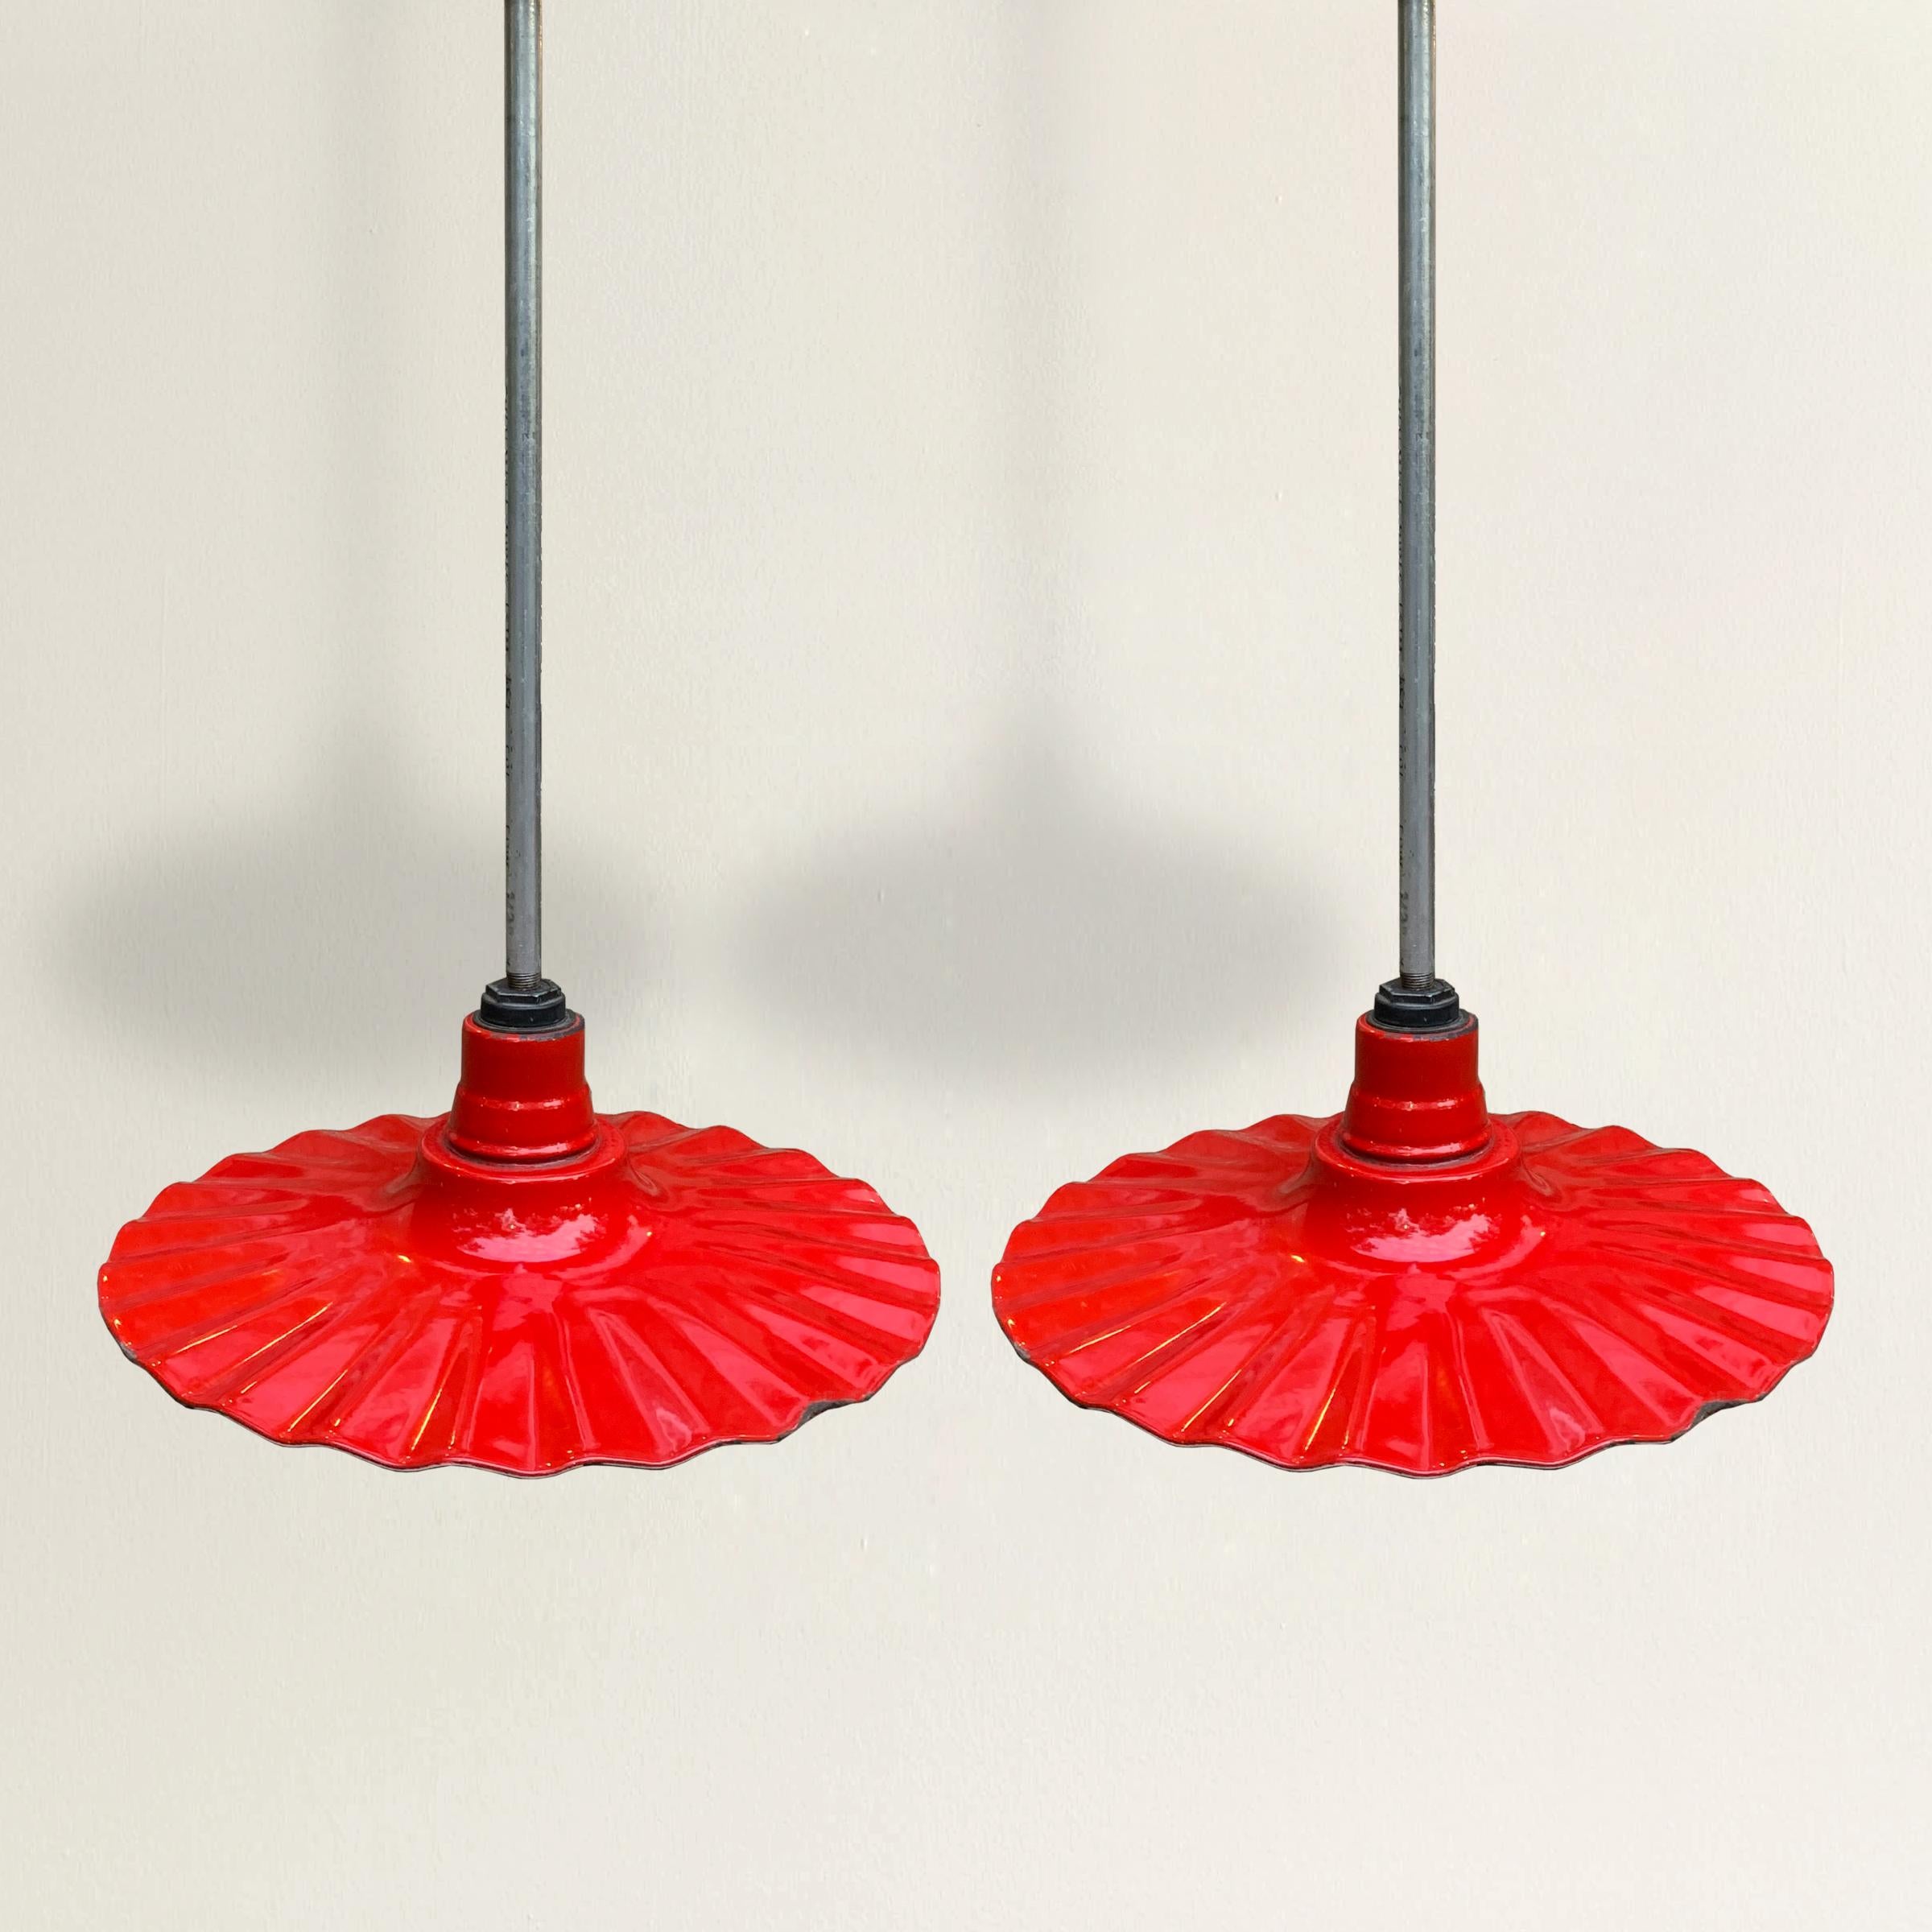 A wonderful and playful pair of early 20th century American industrial light fixtures with red enamel ruffled shades. Fixtures have been re-wired for US.